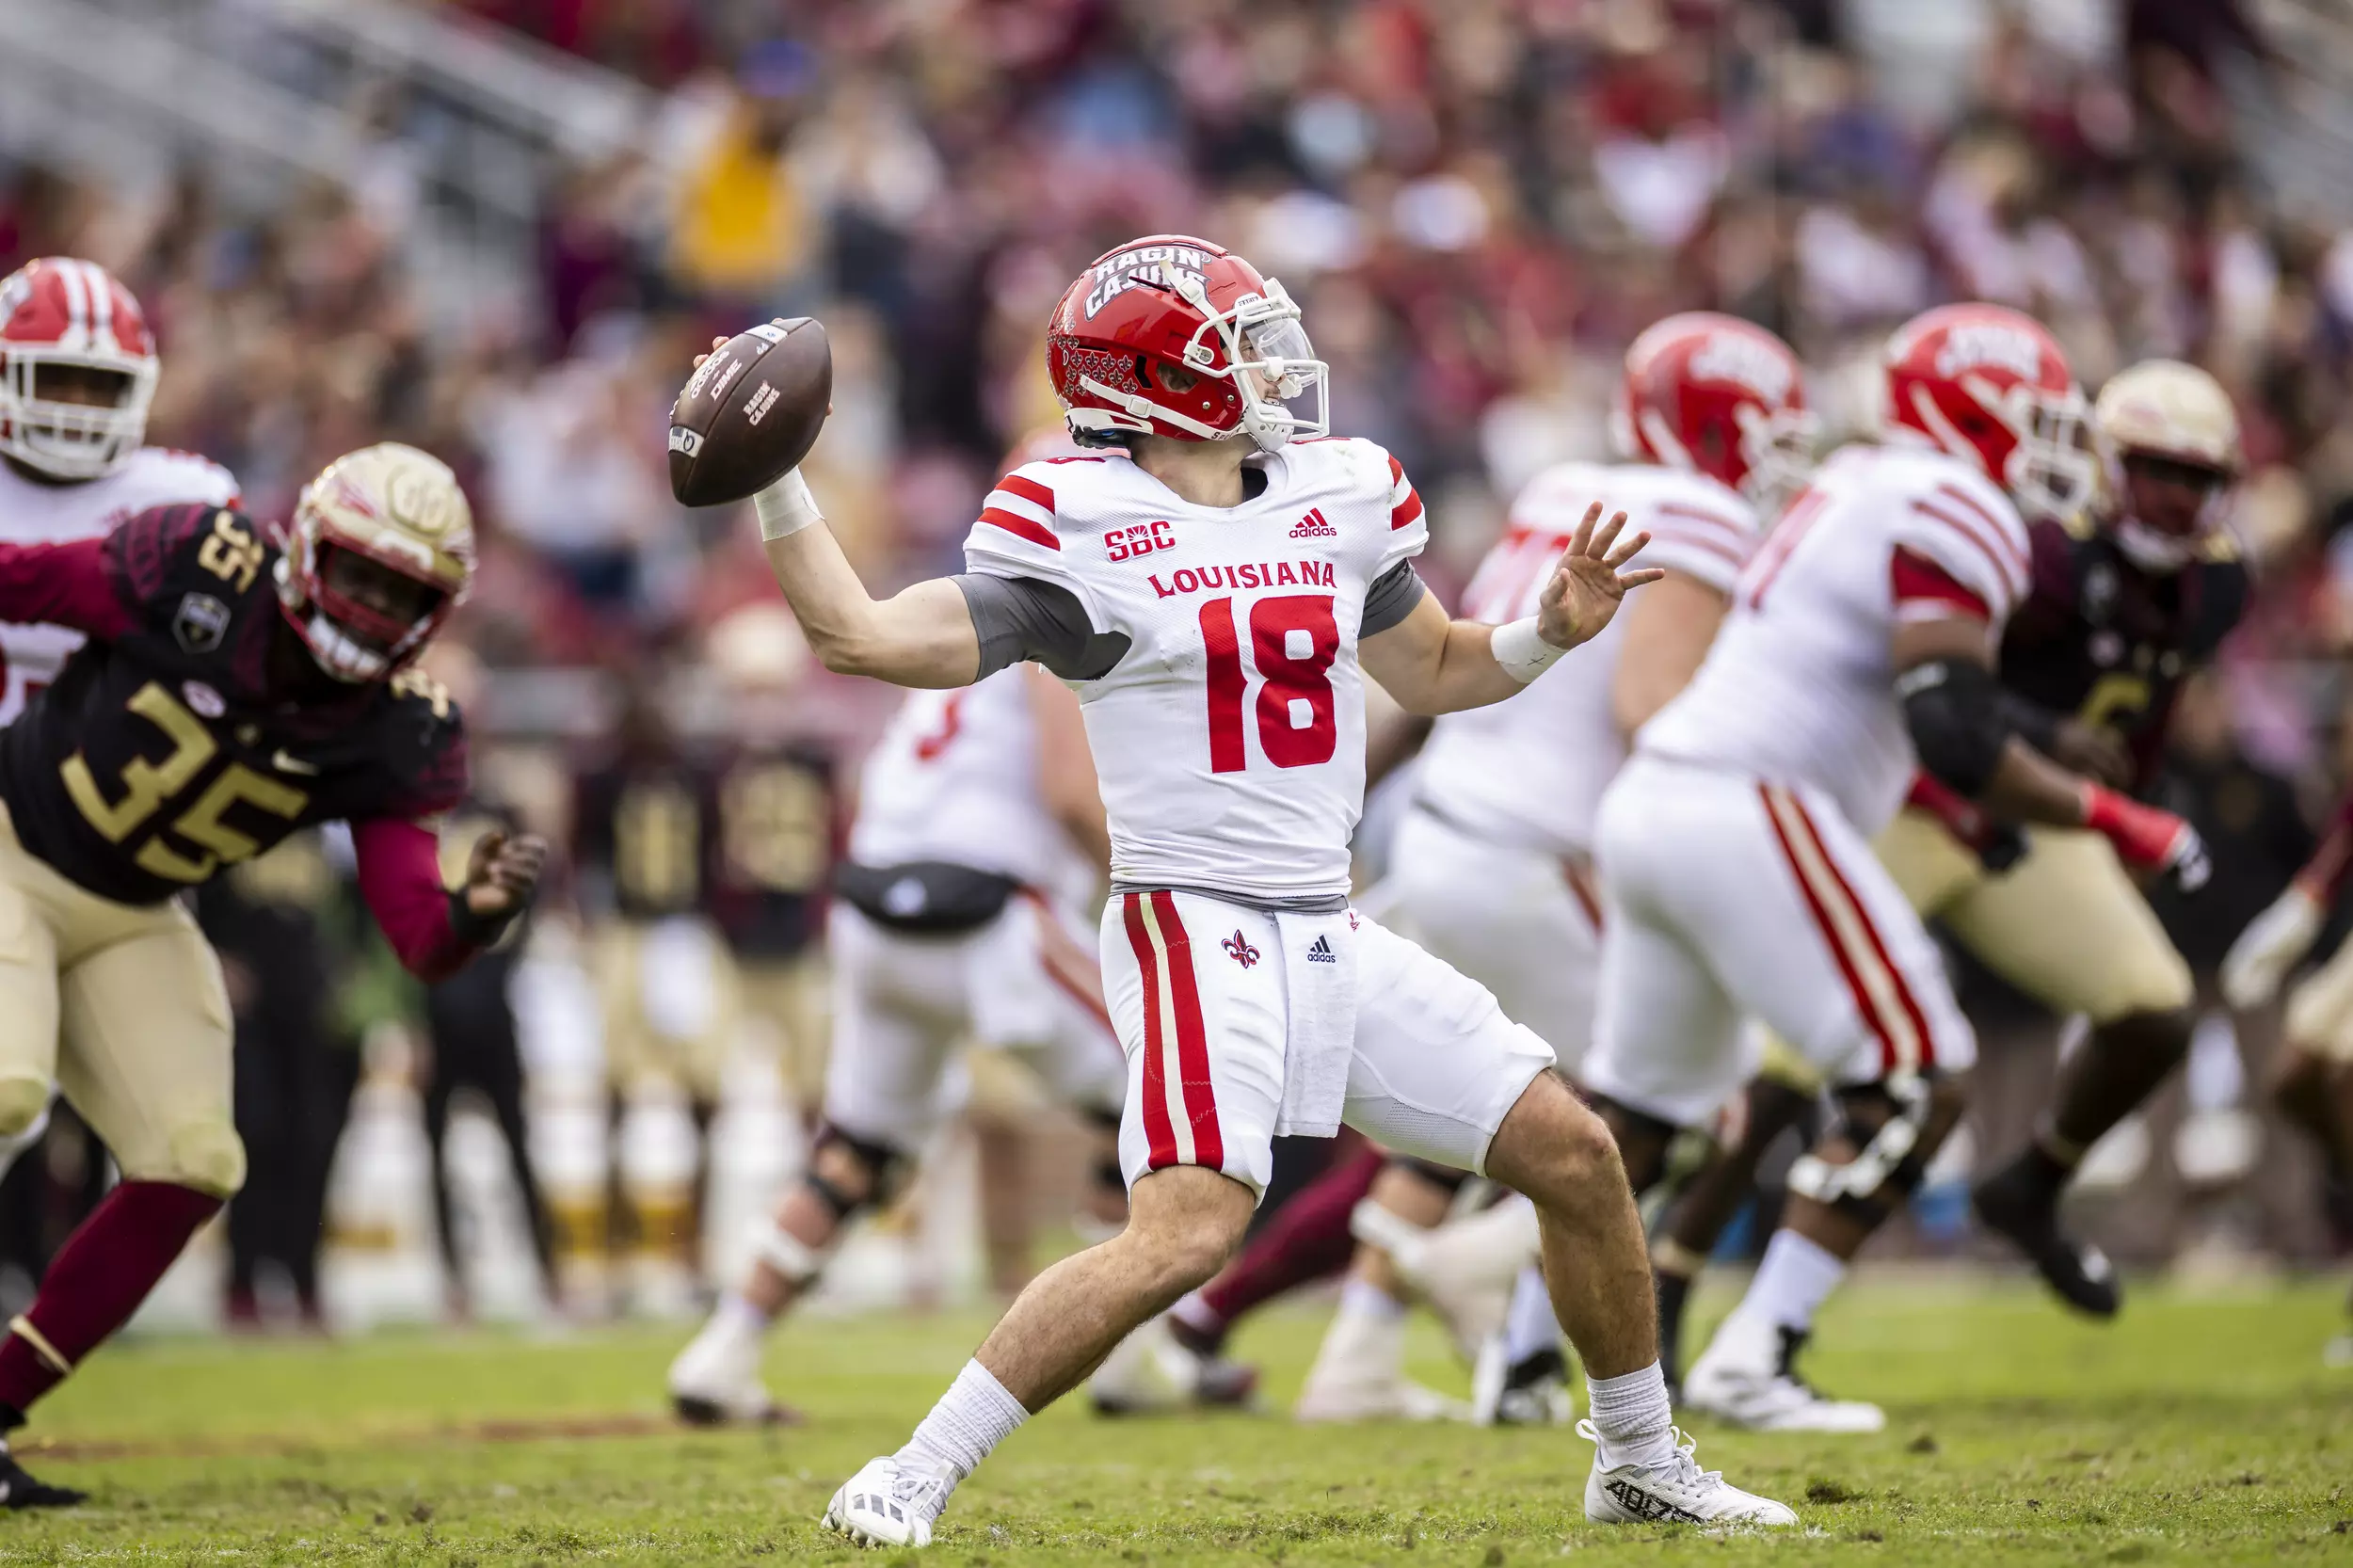 Ragin Cajuns Will Meet Houston Cougars In I-Bowl